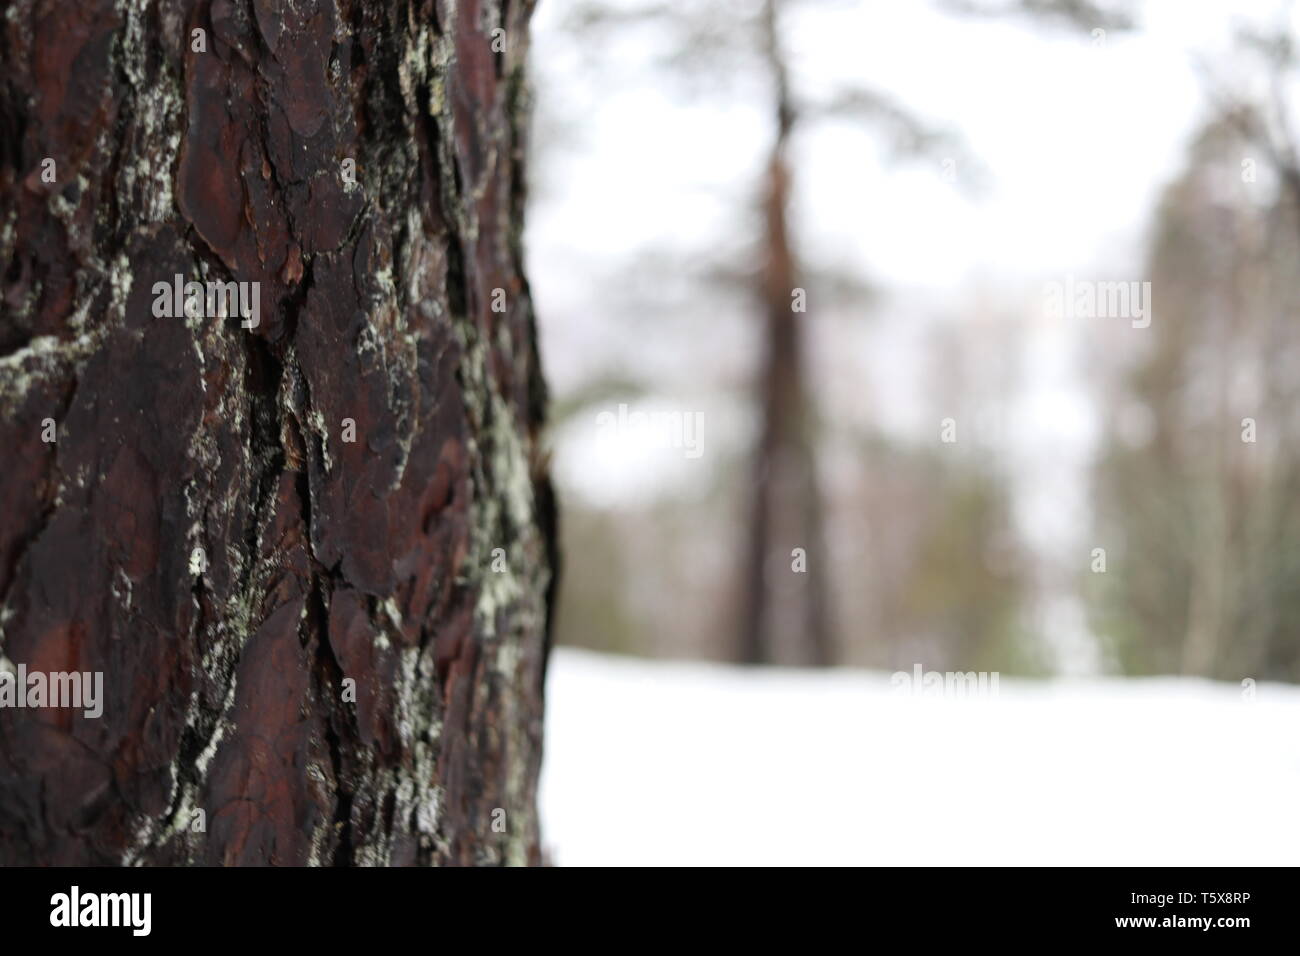 A close-up of a pine tree trunk in a snowy winter scenery. Stock Photo